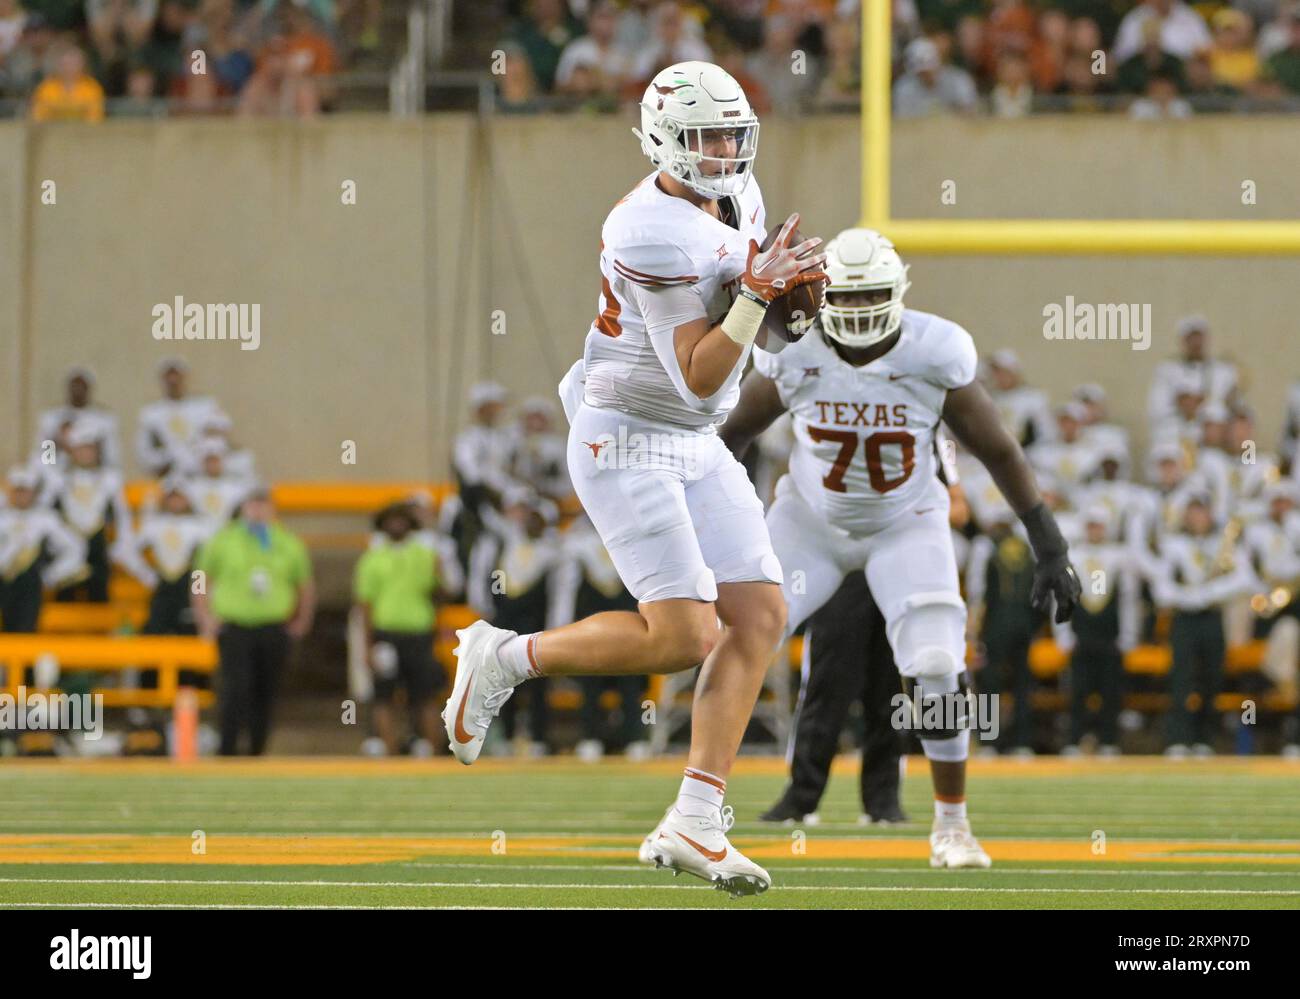 Waco, Texas, USA. 23rd Sep, 2023. Texas Longhorns tight end Gunnar Helm (85) catches a pass during the 1st half of the NCAA Football game between the Texas Longhorns and Baylor Bears at McLane Stadium in Waco, Texas. Matthew Lynch/CSM/Alamy Live News Stock Photo